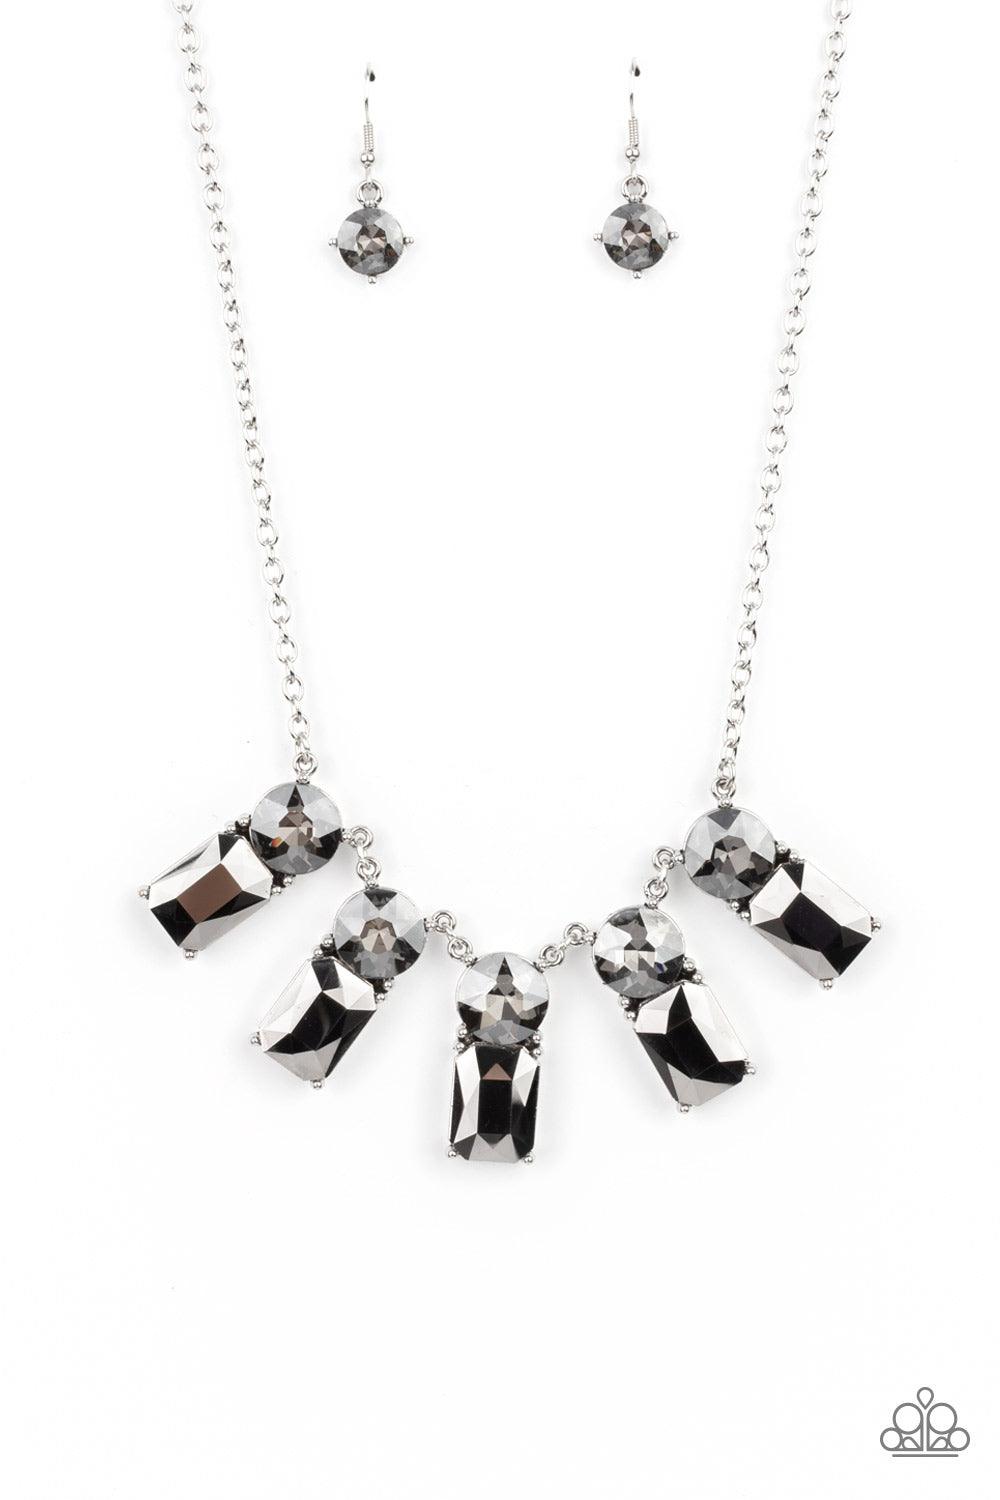 Paparazzi Accessories Celestial Royal - Silver Featuring classic pronged fittings, a dramatic collection of oversized smoky rhinestones and emerald cut hematite gems fan out below the collar for an outrageous sparkle. Features an adjustable clasp closure.